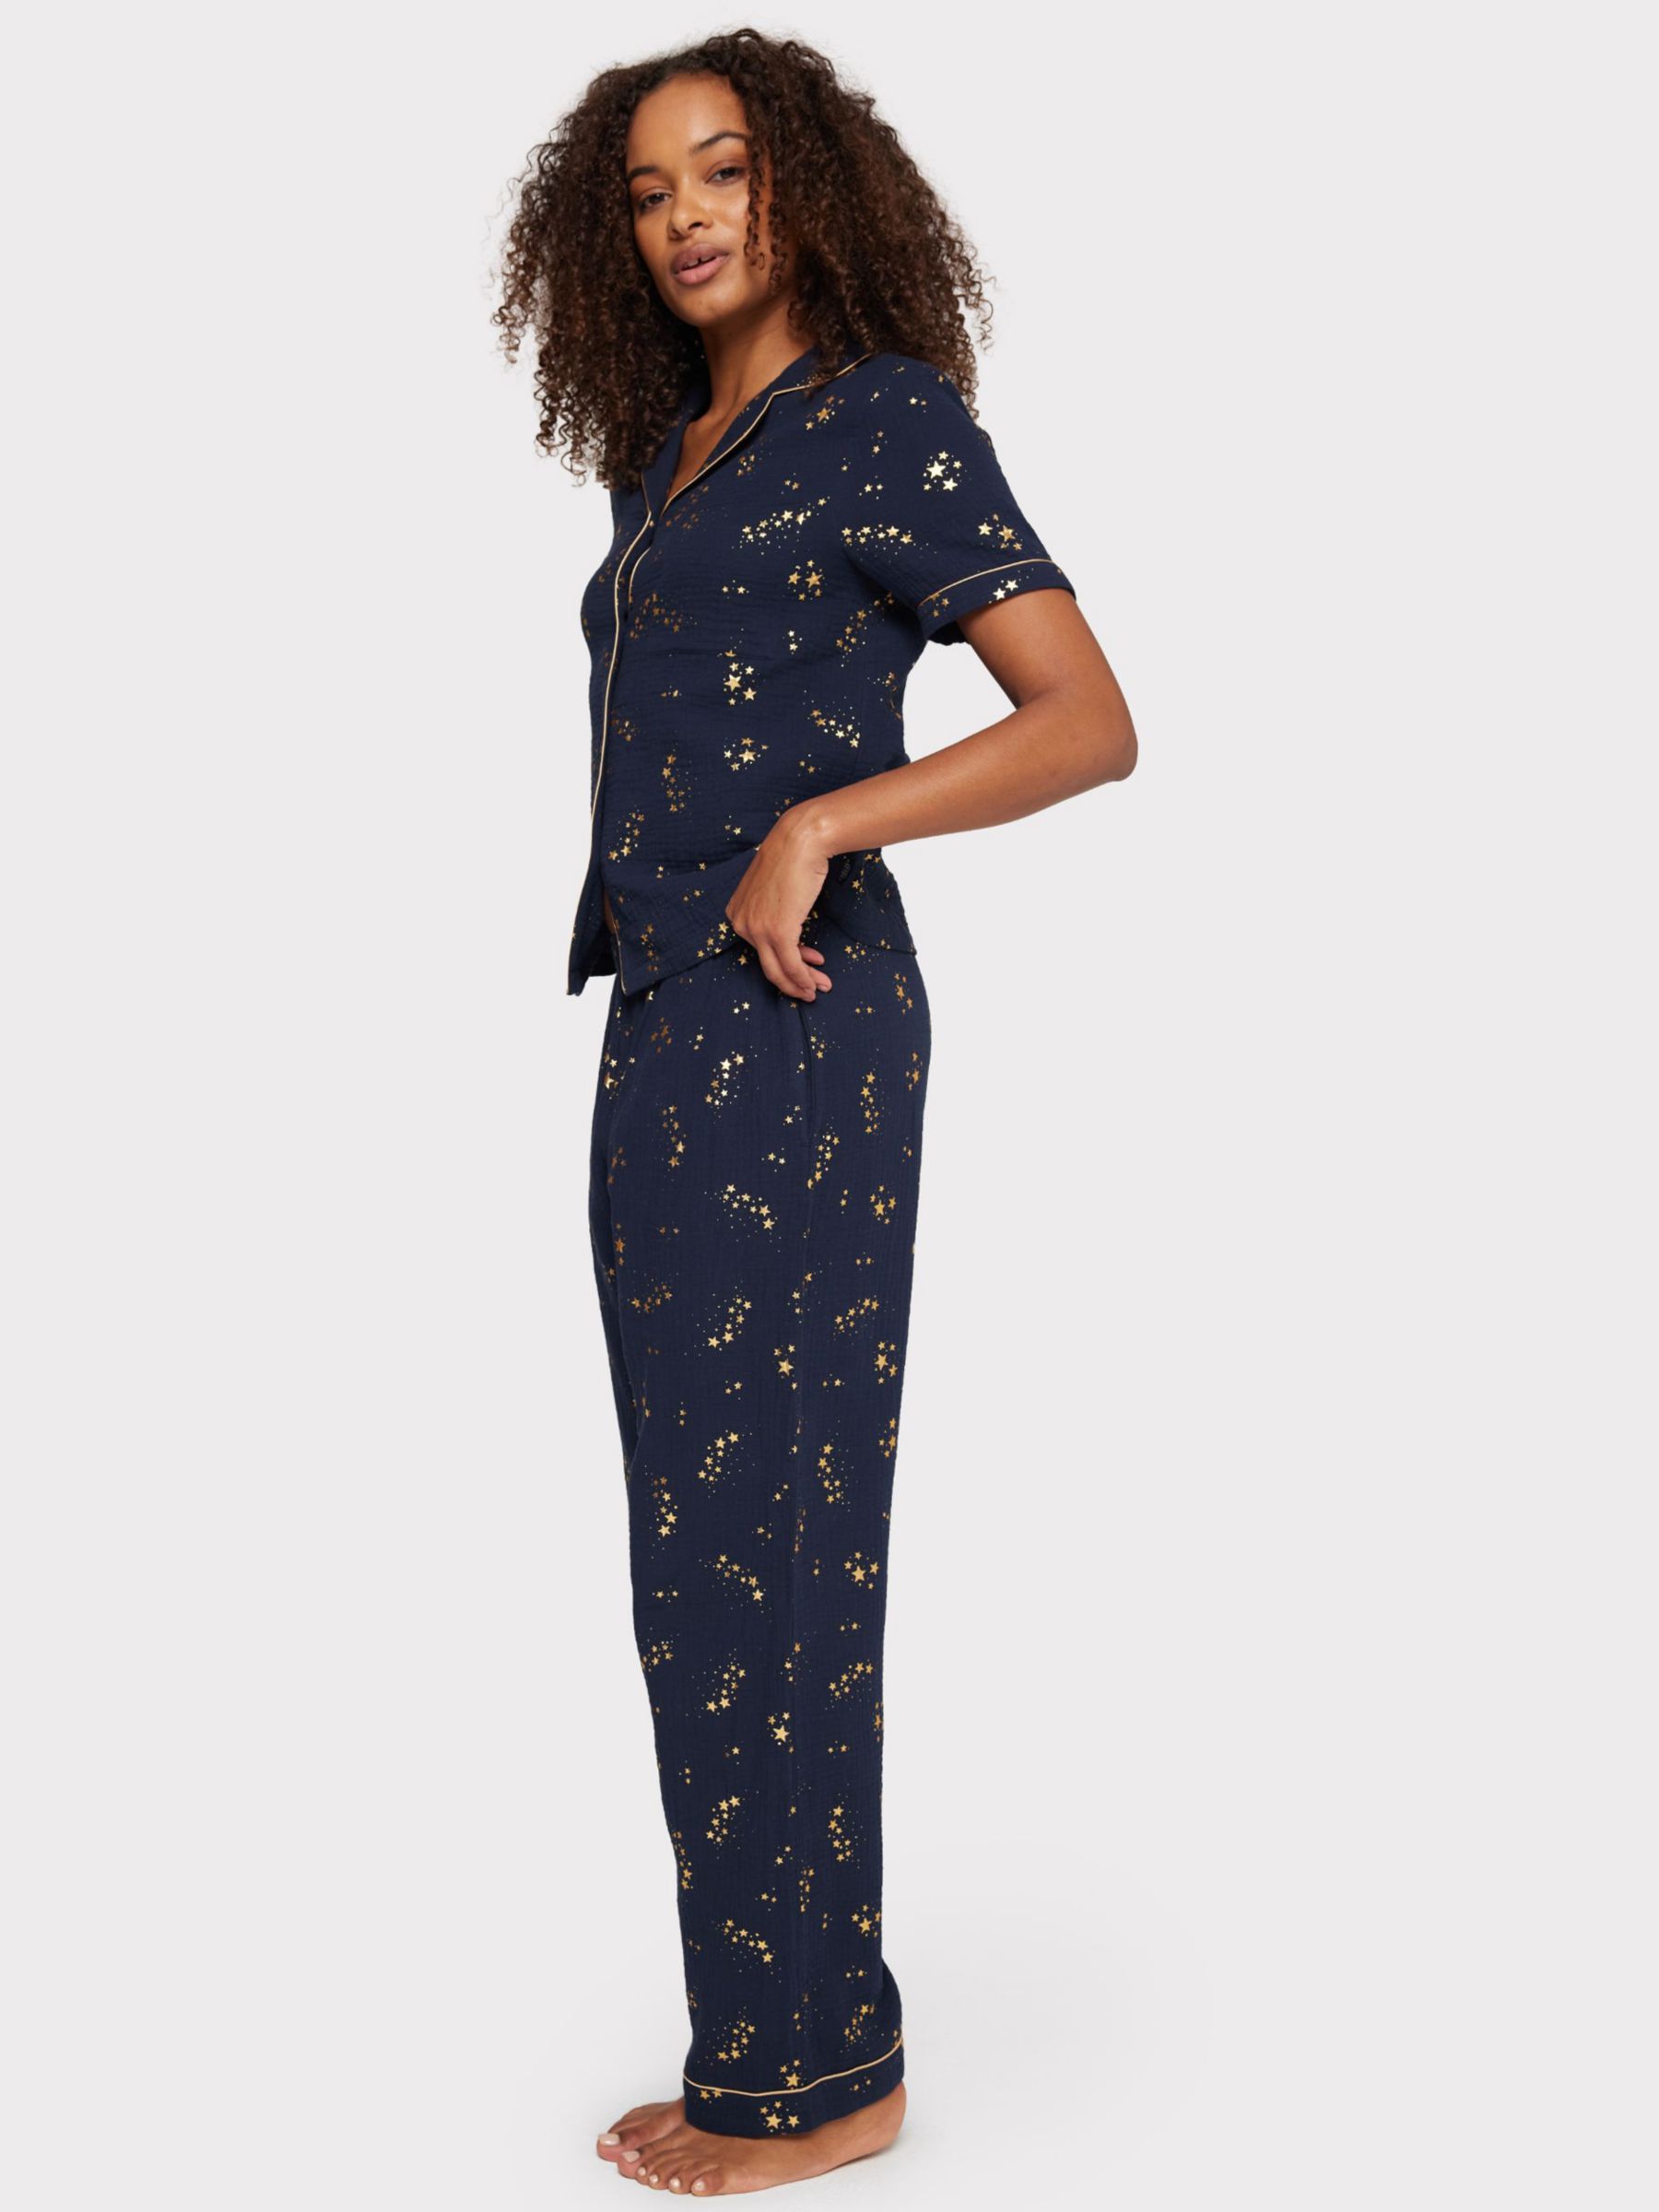 Buy Chelsea Peers Cotton Cheesecloth Foil Star Long Pajama Set Online at johnlewis.com